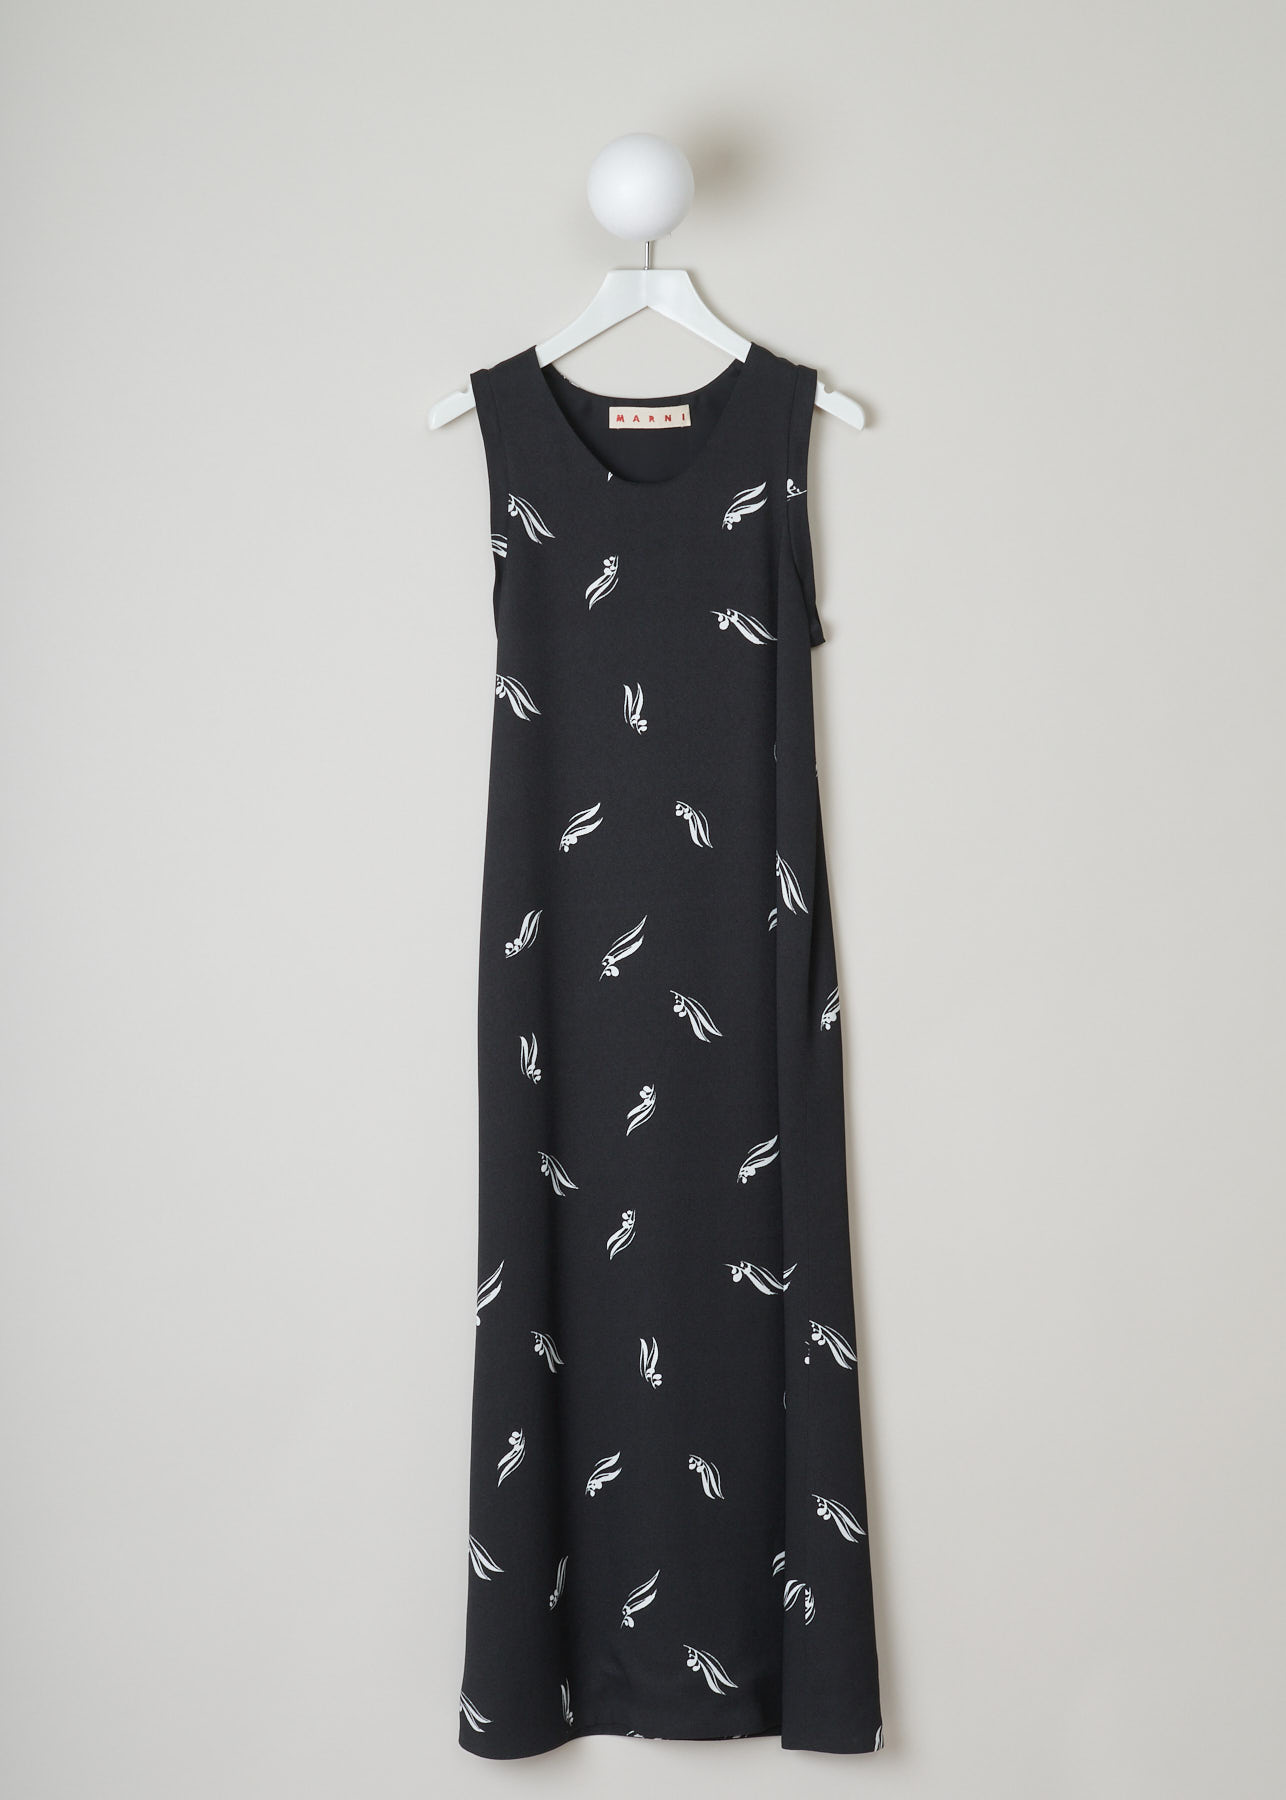 Marni, long black sleeveless dress, ABMAT87JUY_TV478_OPN99_Black, black, front, Maxi black sleeveless dress. High neckline, with an fun white print looking similar to cherries on the stem.  